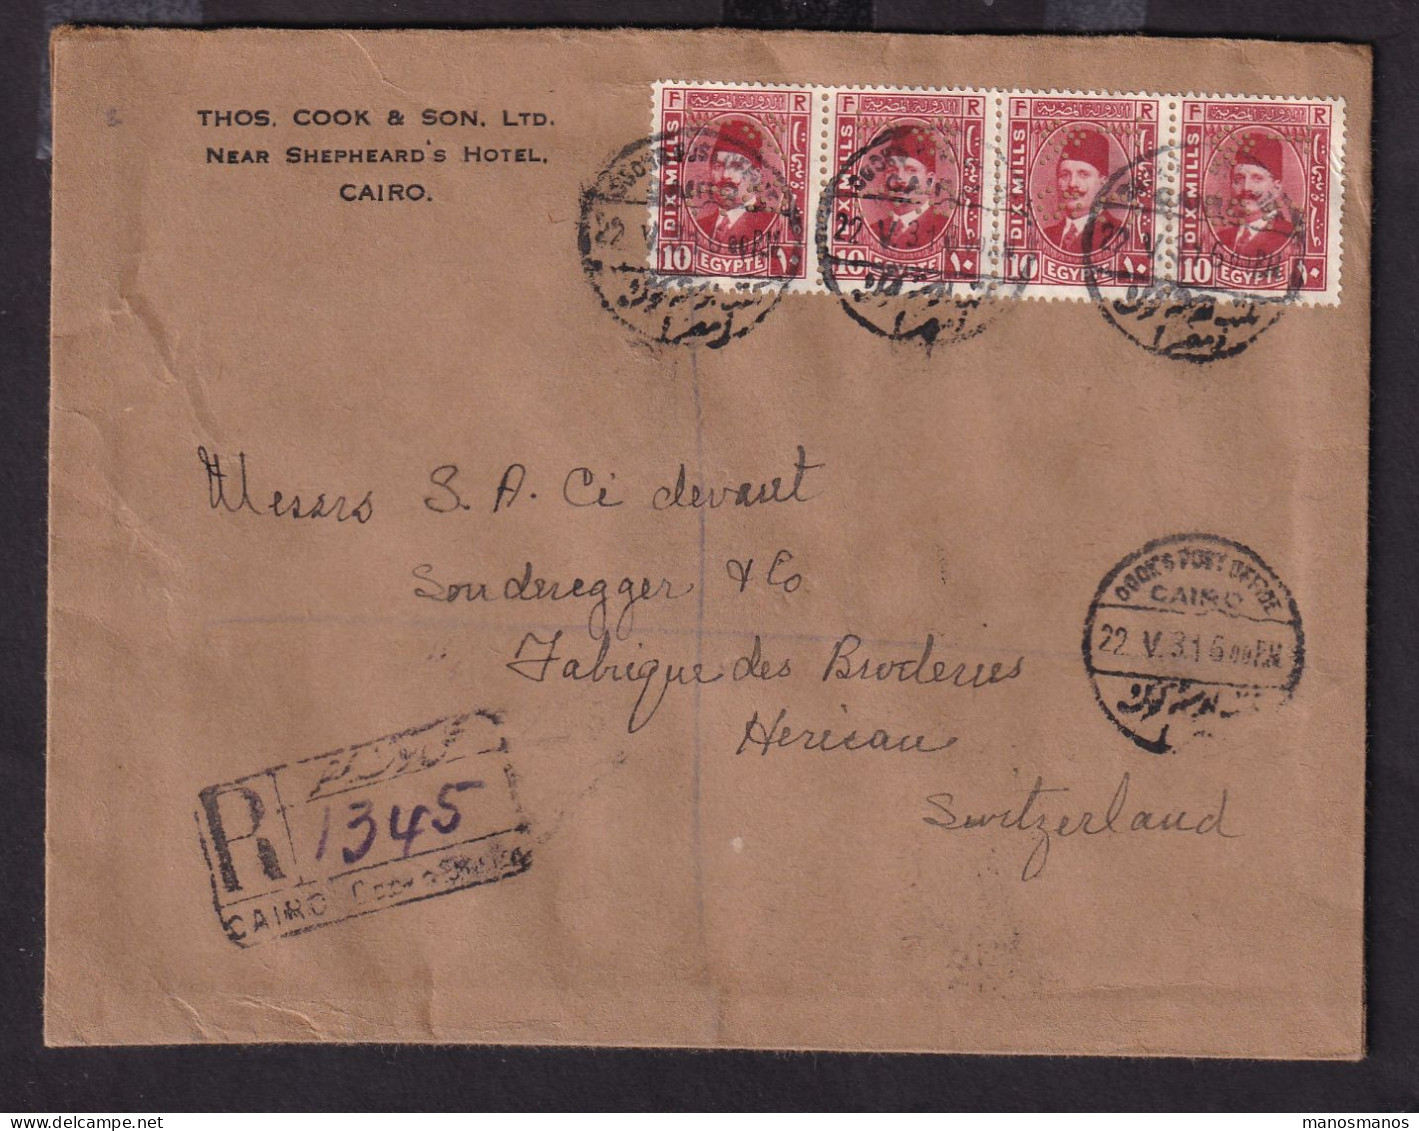 353/31 -- EGYPT PERFINS - Registered Envelope Fouad Stamps For 40 Mills COOK'S P.O. CAIRO 1931 - Perf. T.C. § S. - Storia Postale